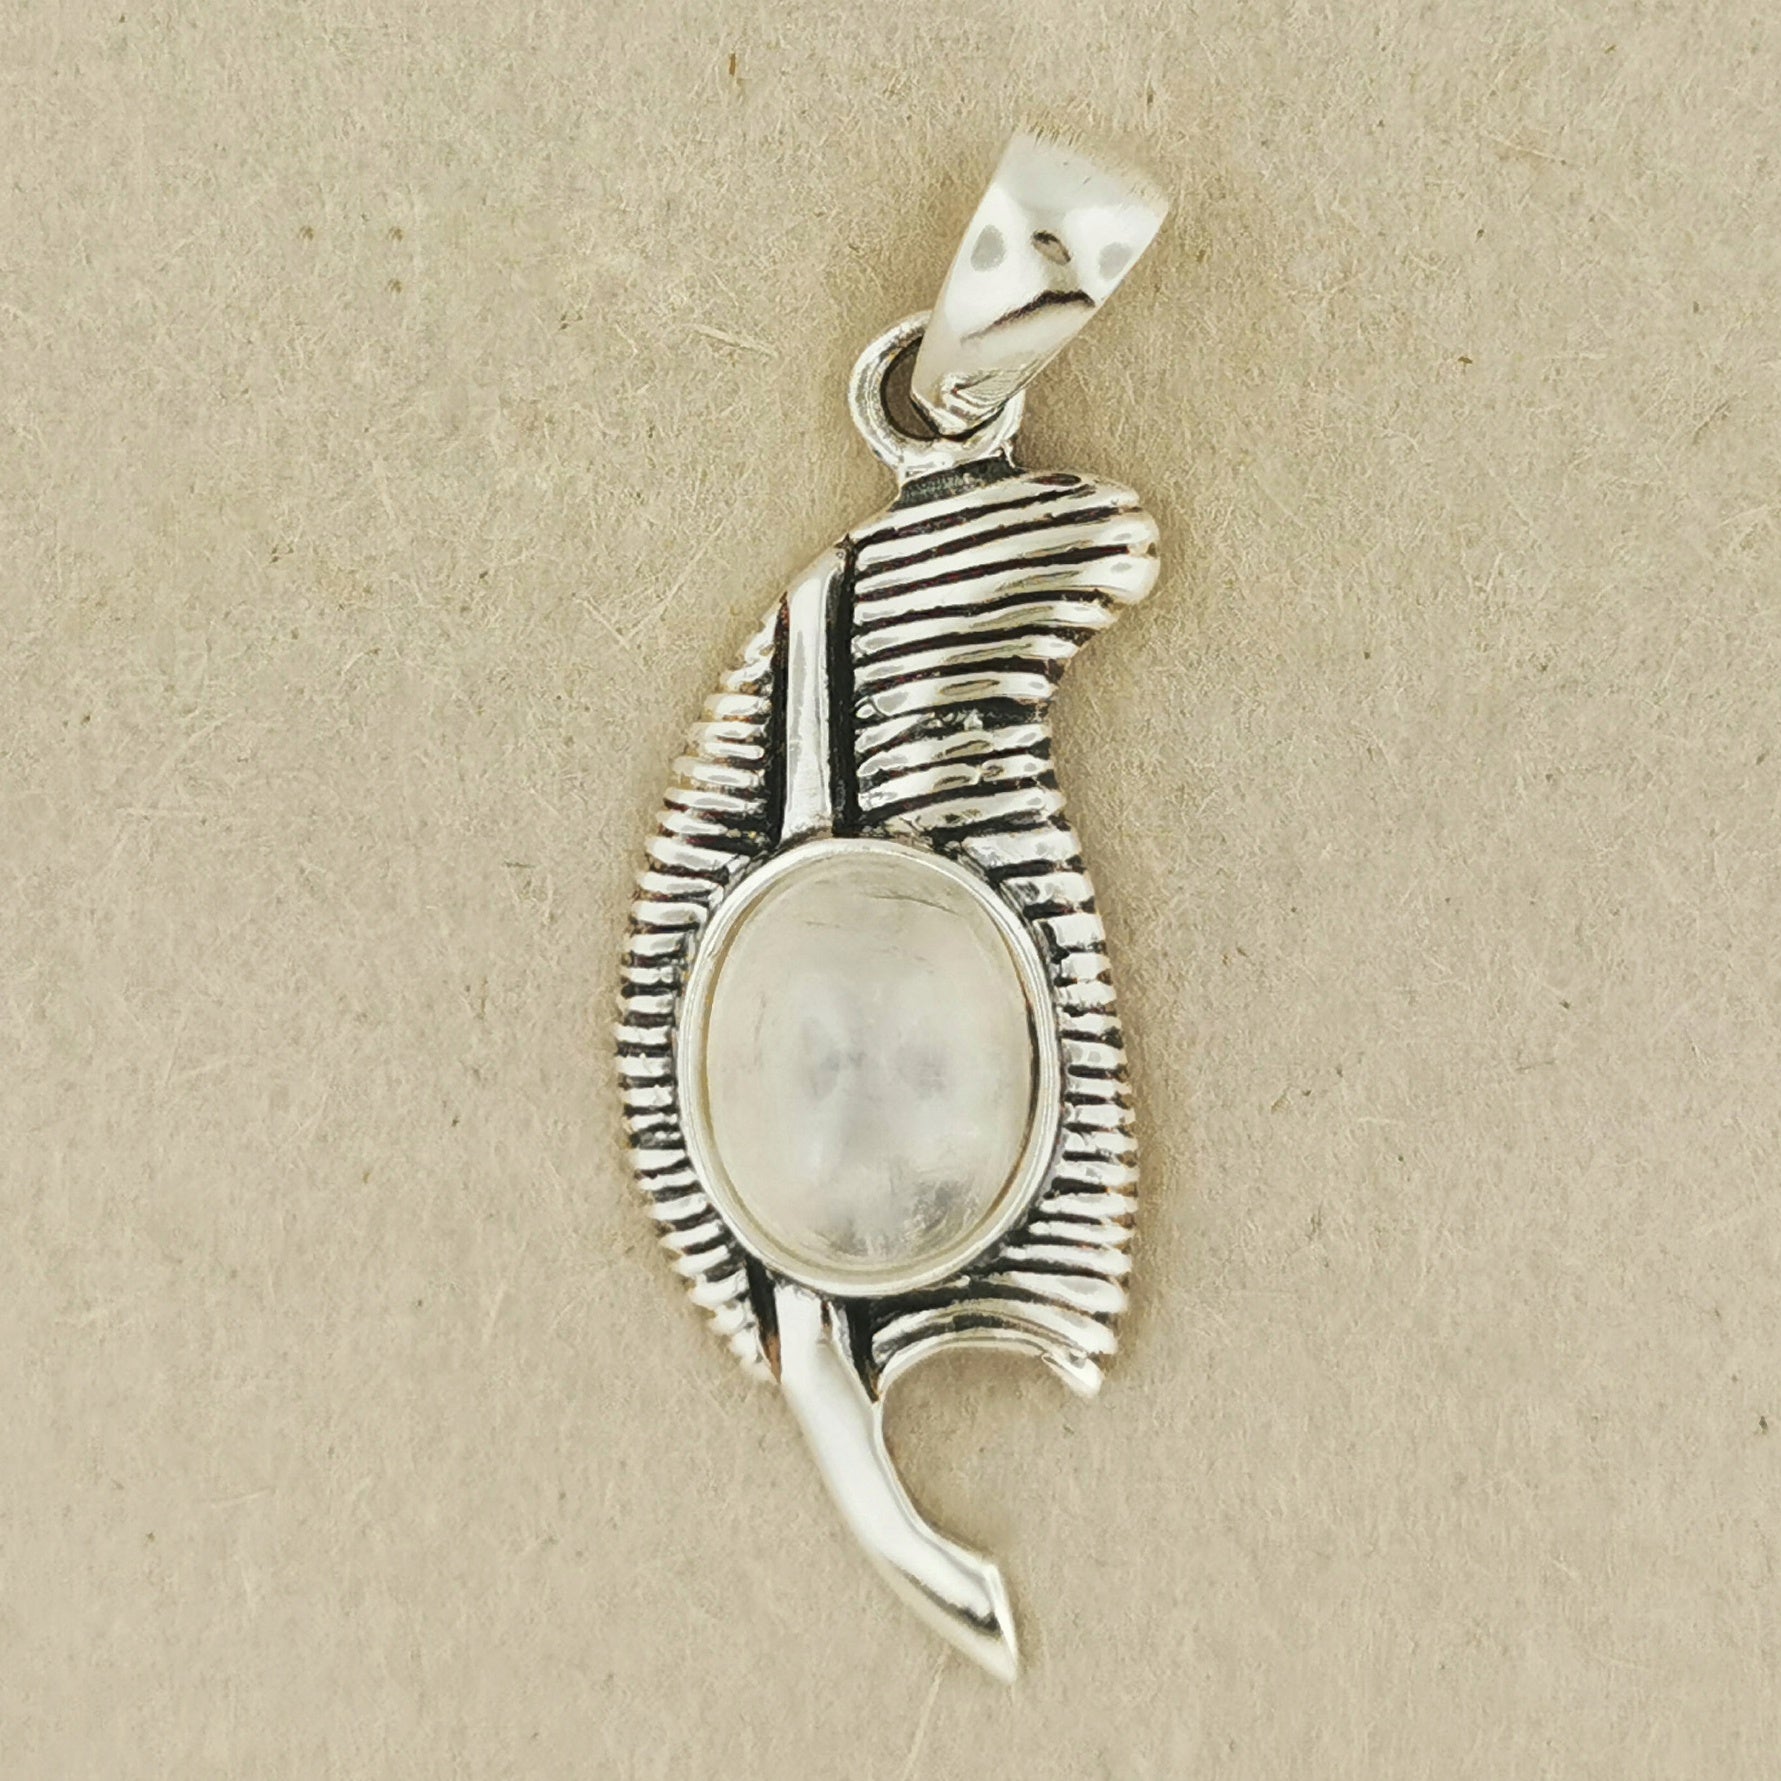 Feather of Ma'at Pendant in Sterling Silver with Rainbow Moonstone, Egyptian Feather Pendant, Egyptian Goddess Pendant, Goddess of Truth Pendant, Silver Egyptian Feather Pendant, Silver Ma’at Pendant, Egyptian Silver Pendant, Silver Gemstone Egyptian Feather Pendant